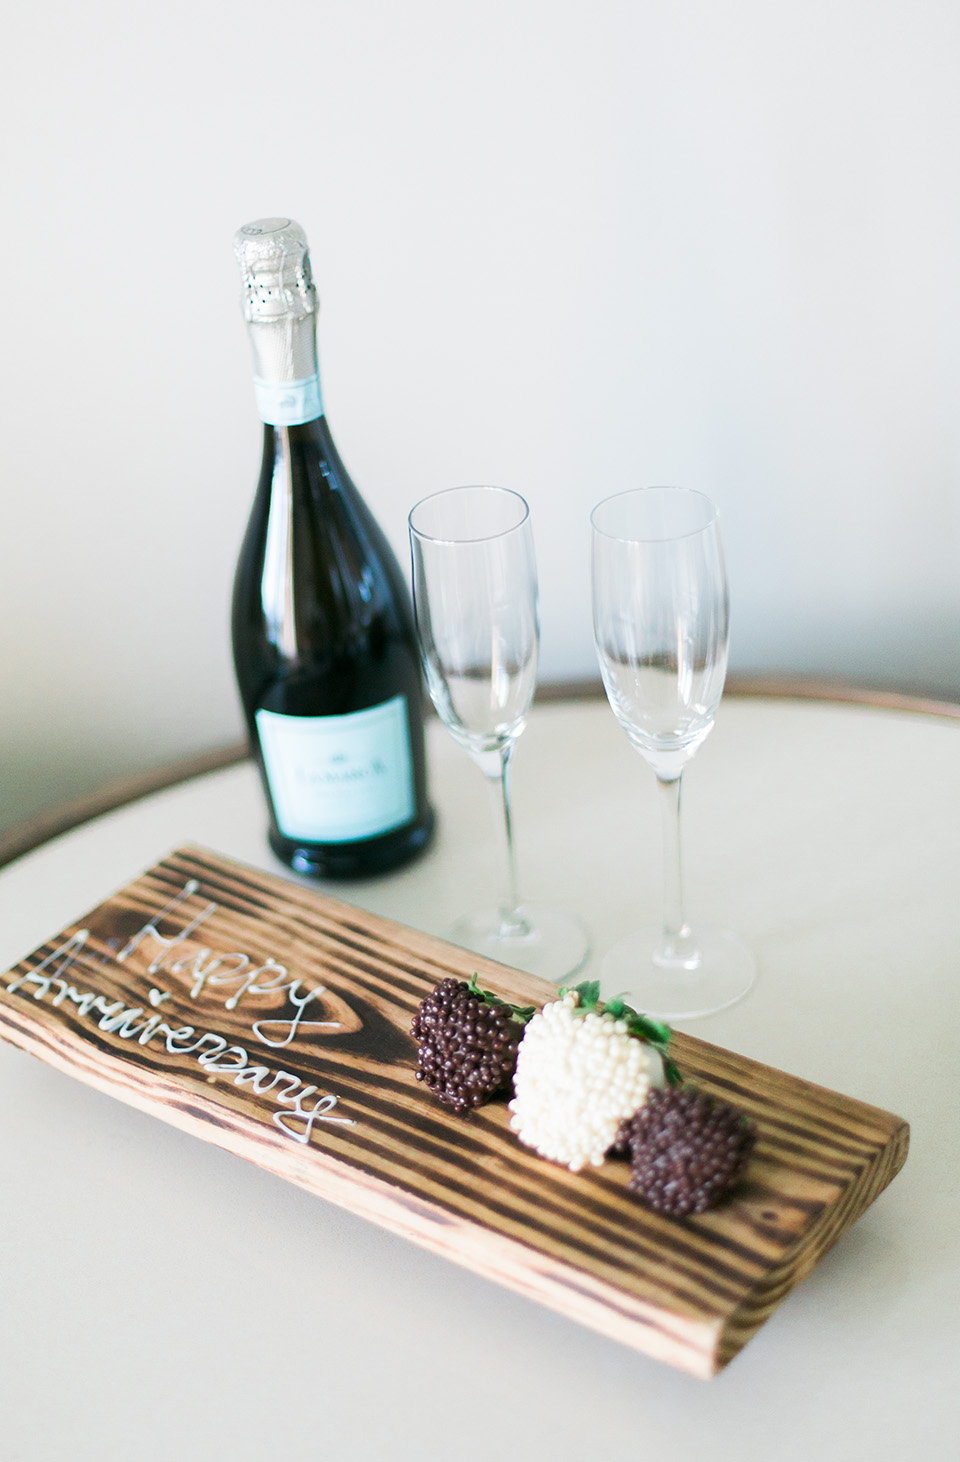 Image of champagne and chocolate covered strawberries at the Omni Amelia Island Plantation Resort.